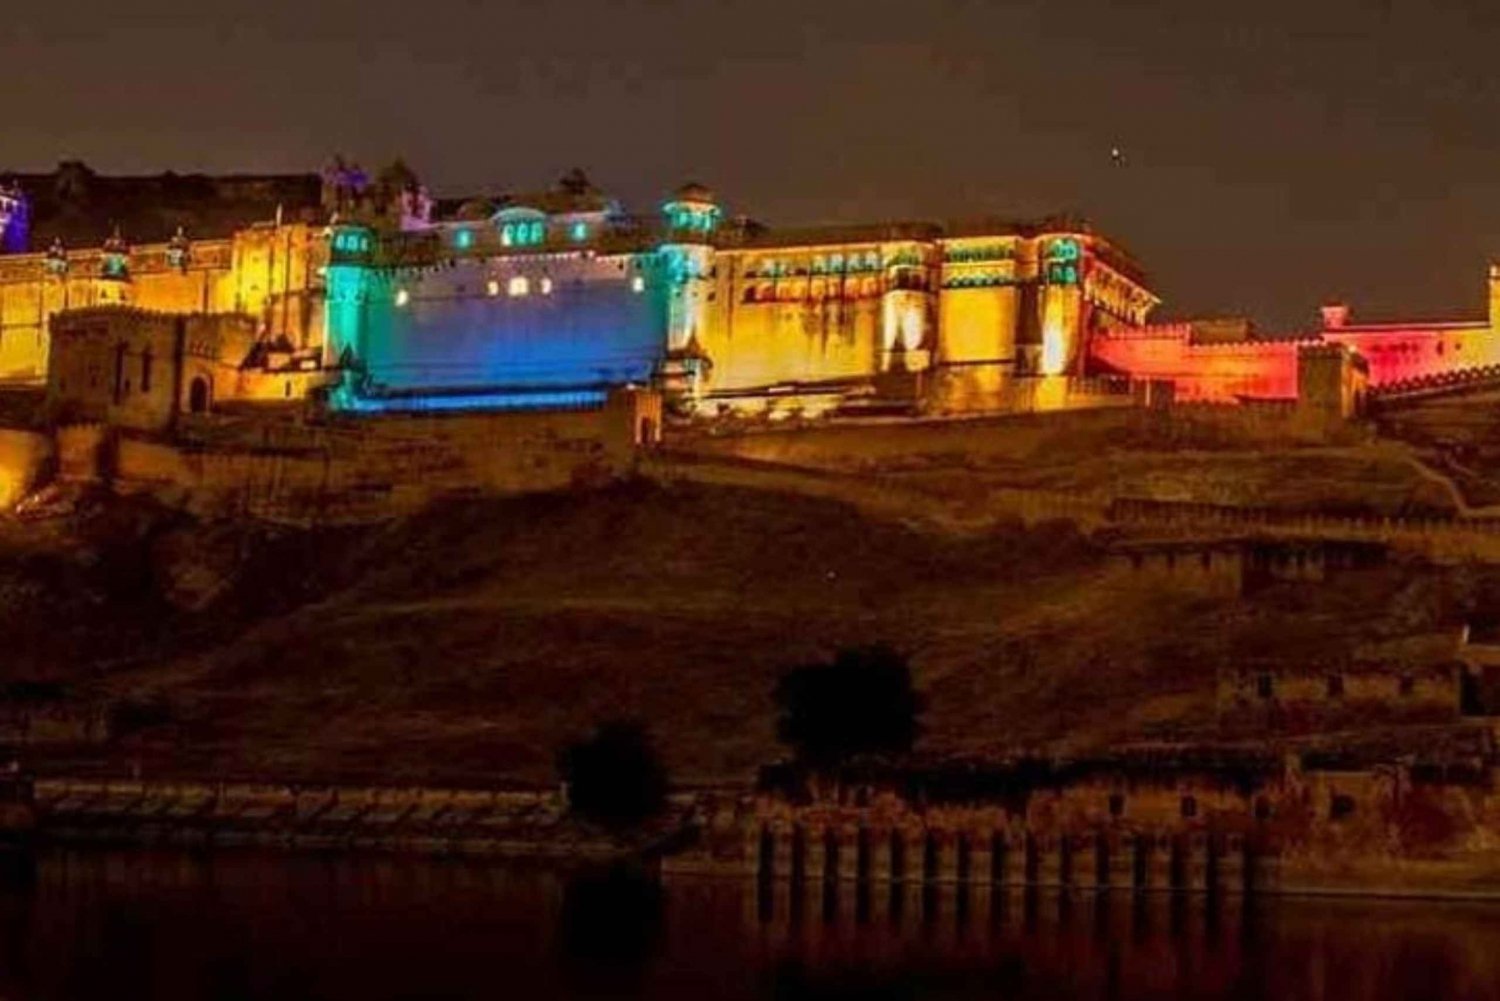 Jaipur: Light & Sound Show with Dinner at Amber Fort